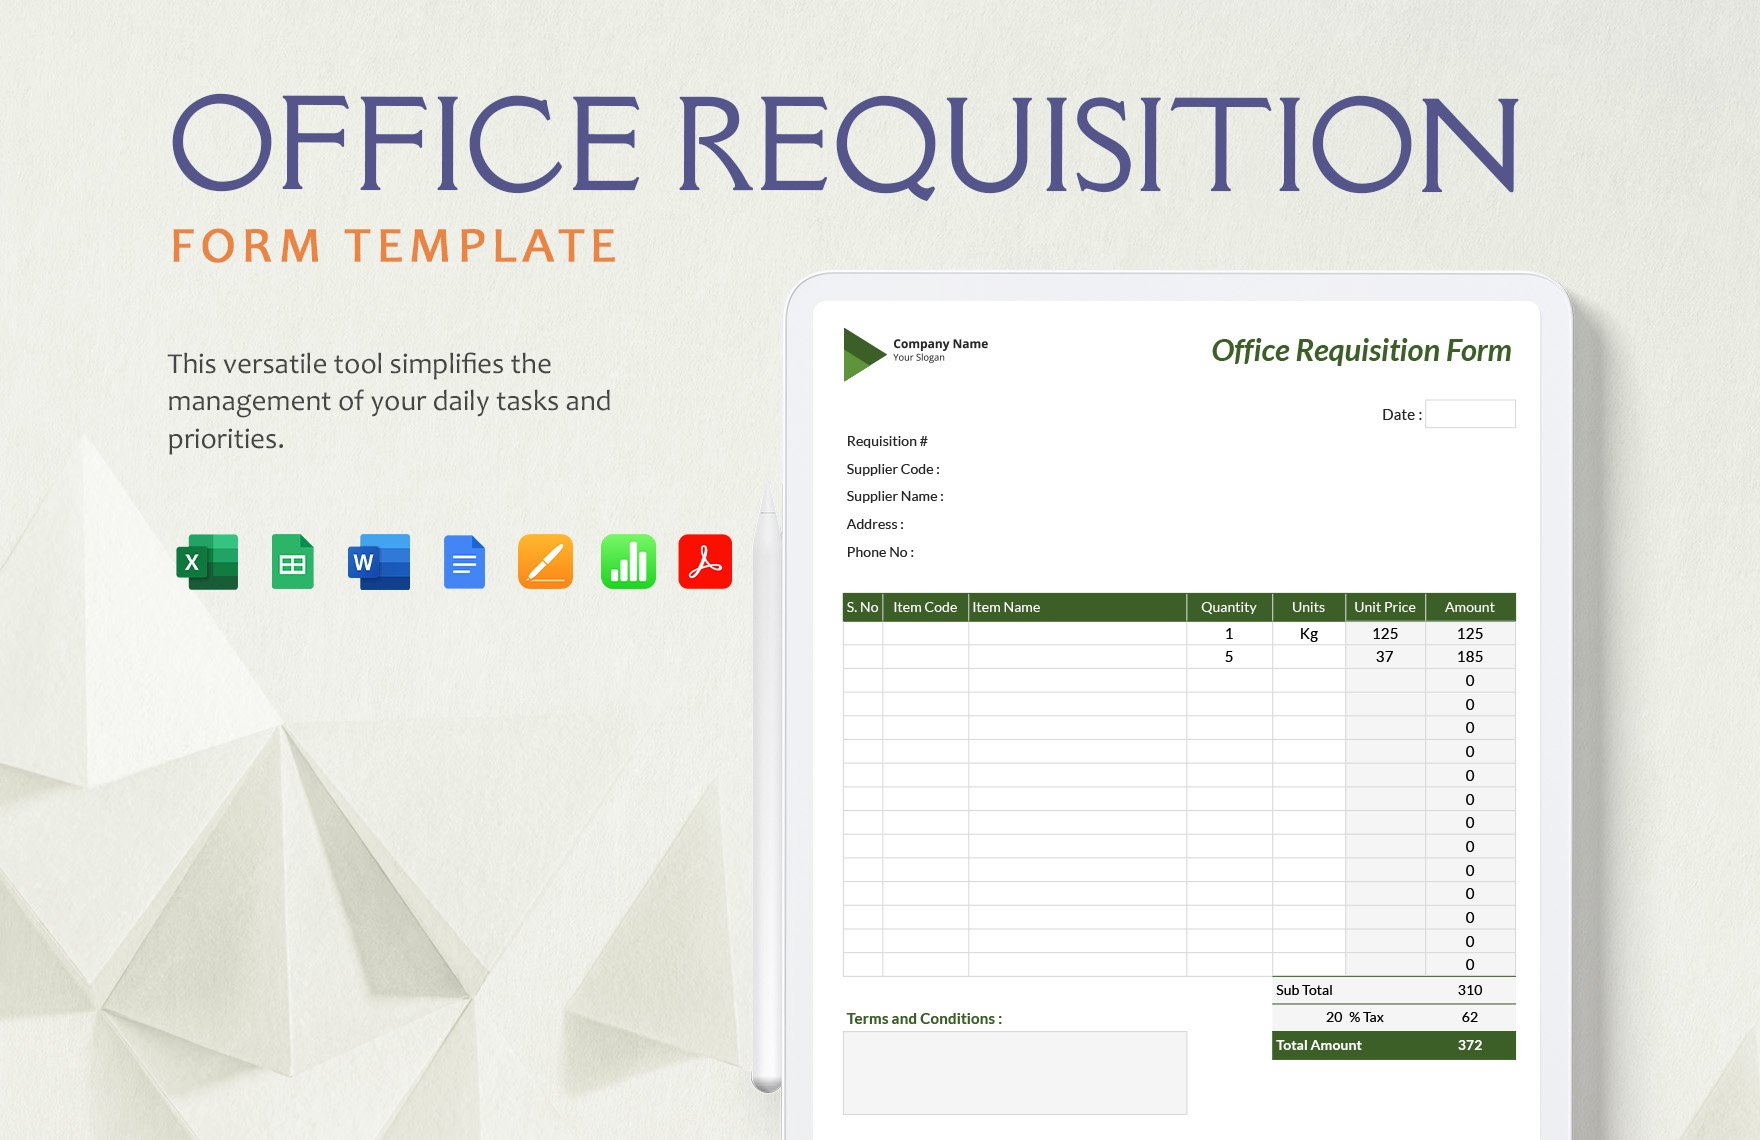 Office Requisition Form Template in Word, Google Docs, Excel, PDF, Google Sheets, Apple Pages, Apple Numbers